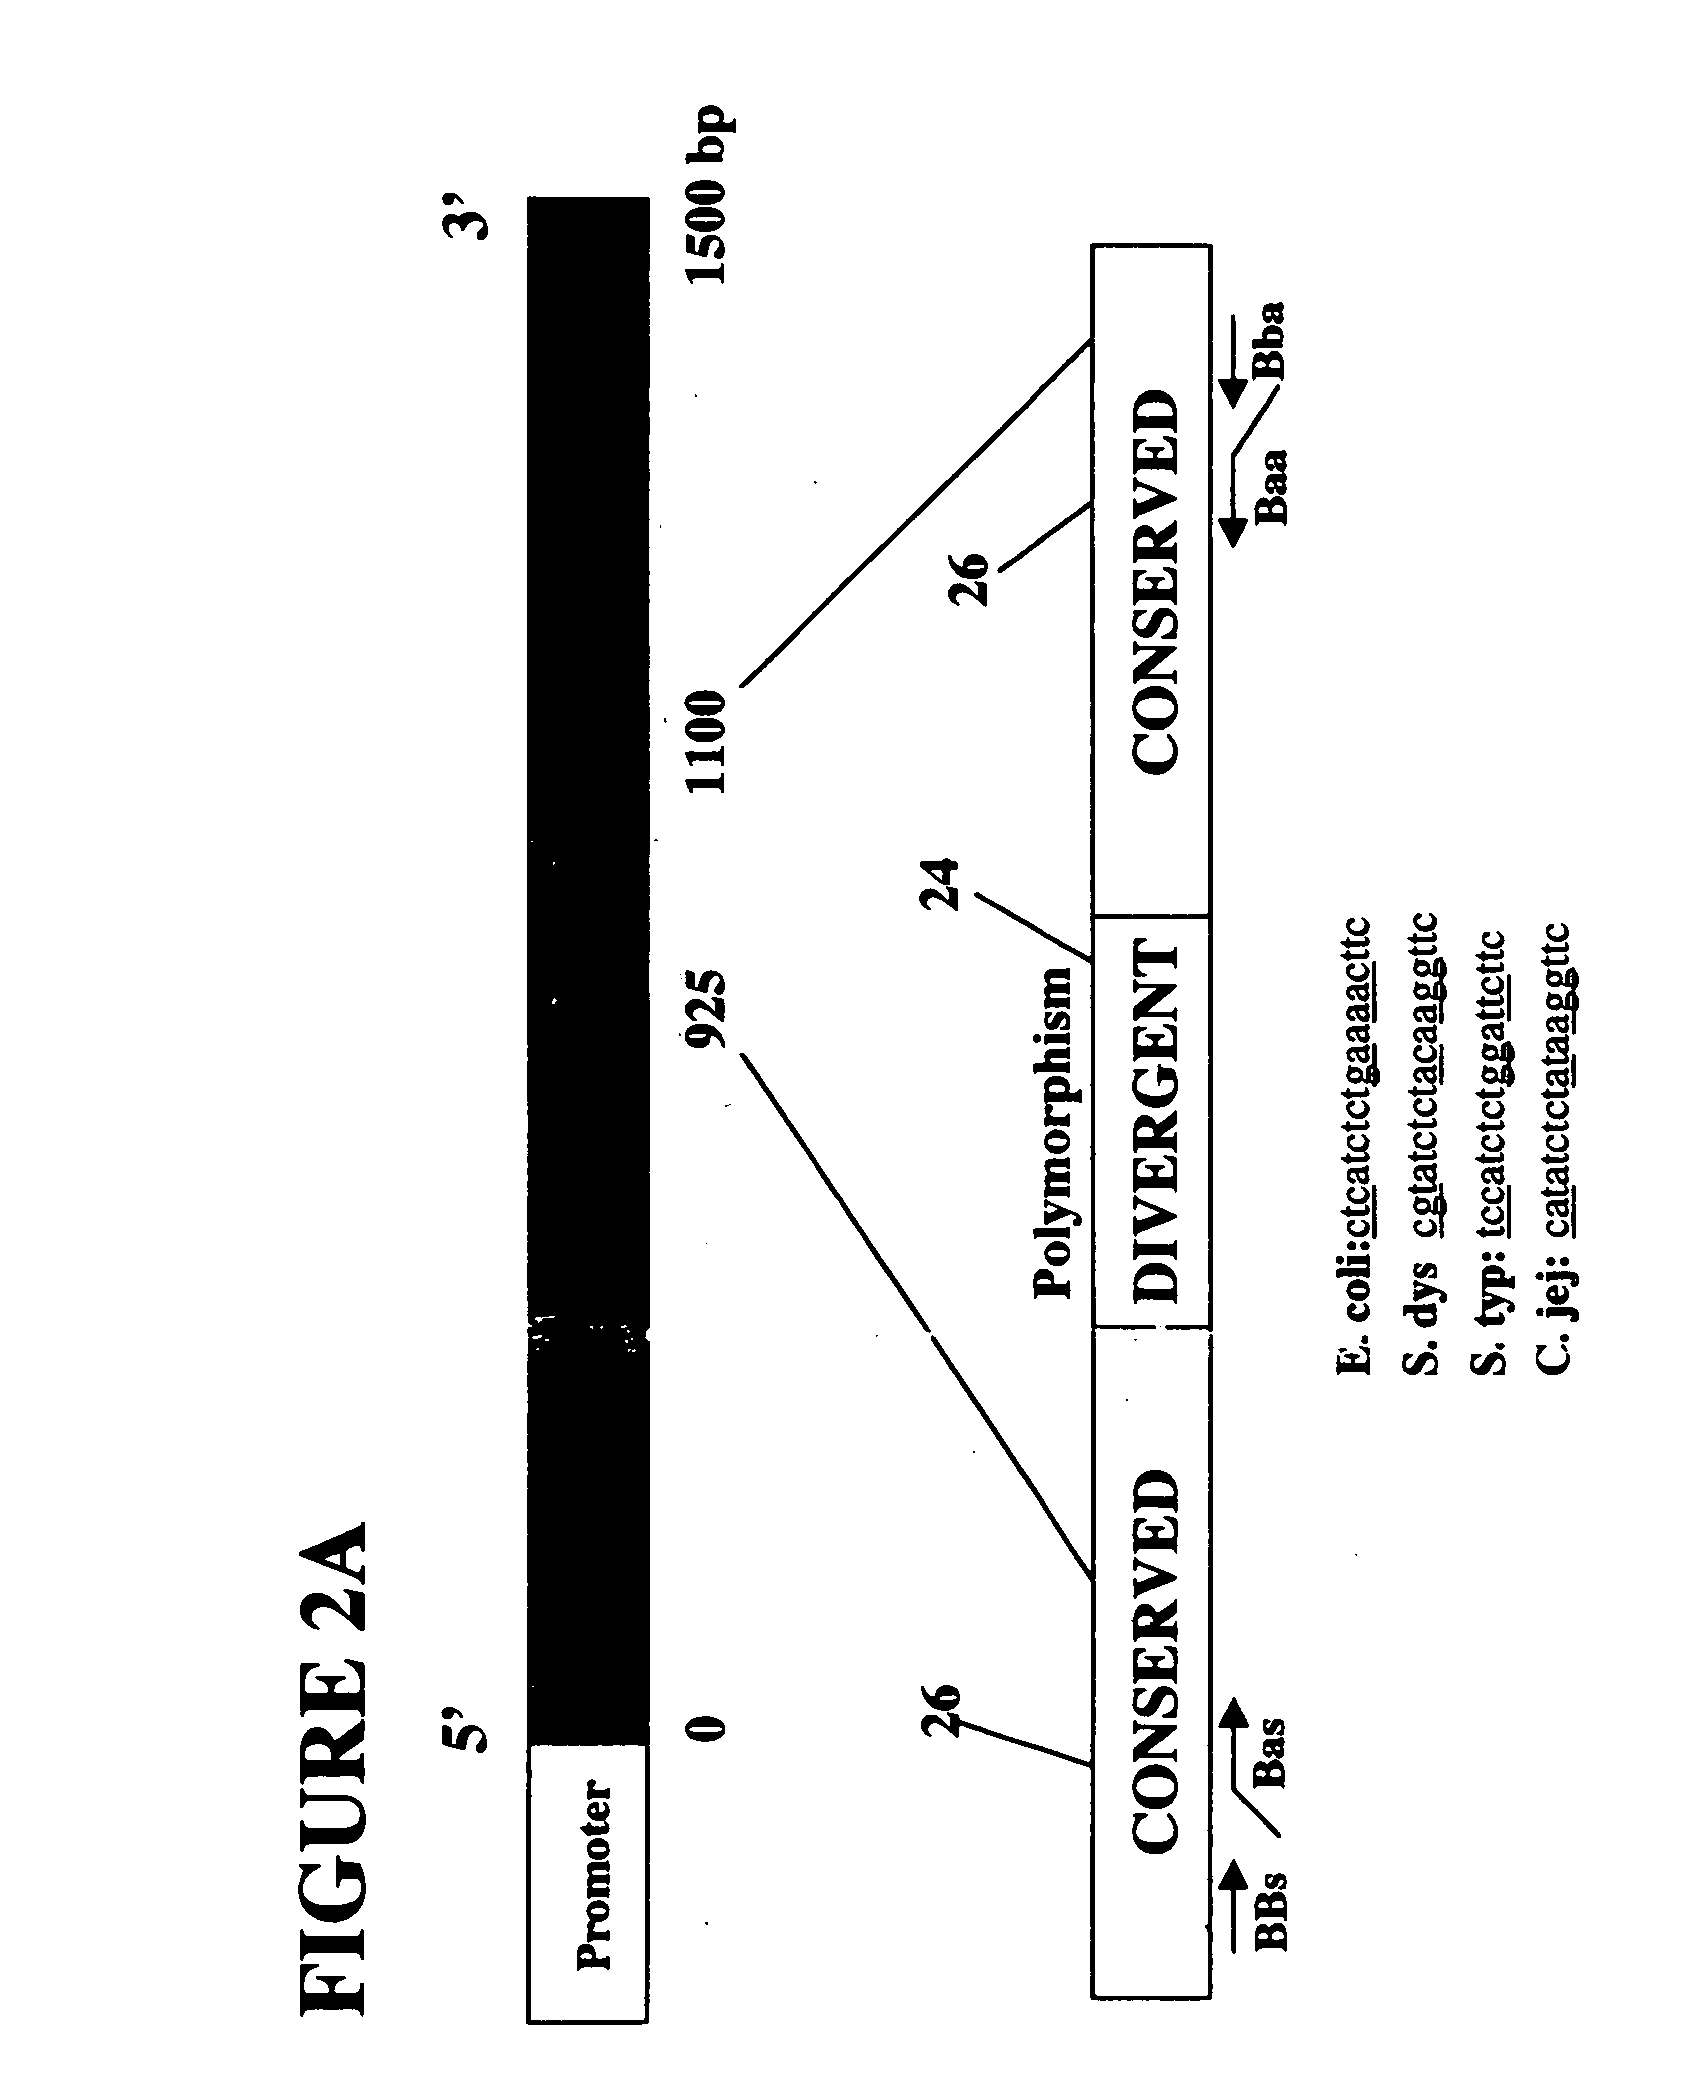 Amplification and separation of nucleic acid sequences using strand displacement amplification and bioelectronic microchip technology